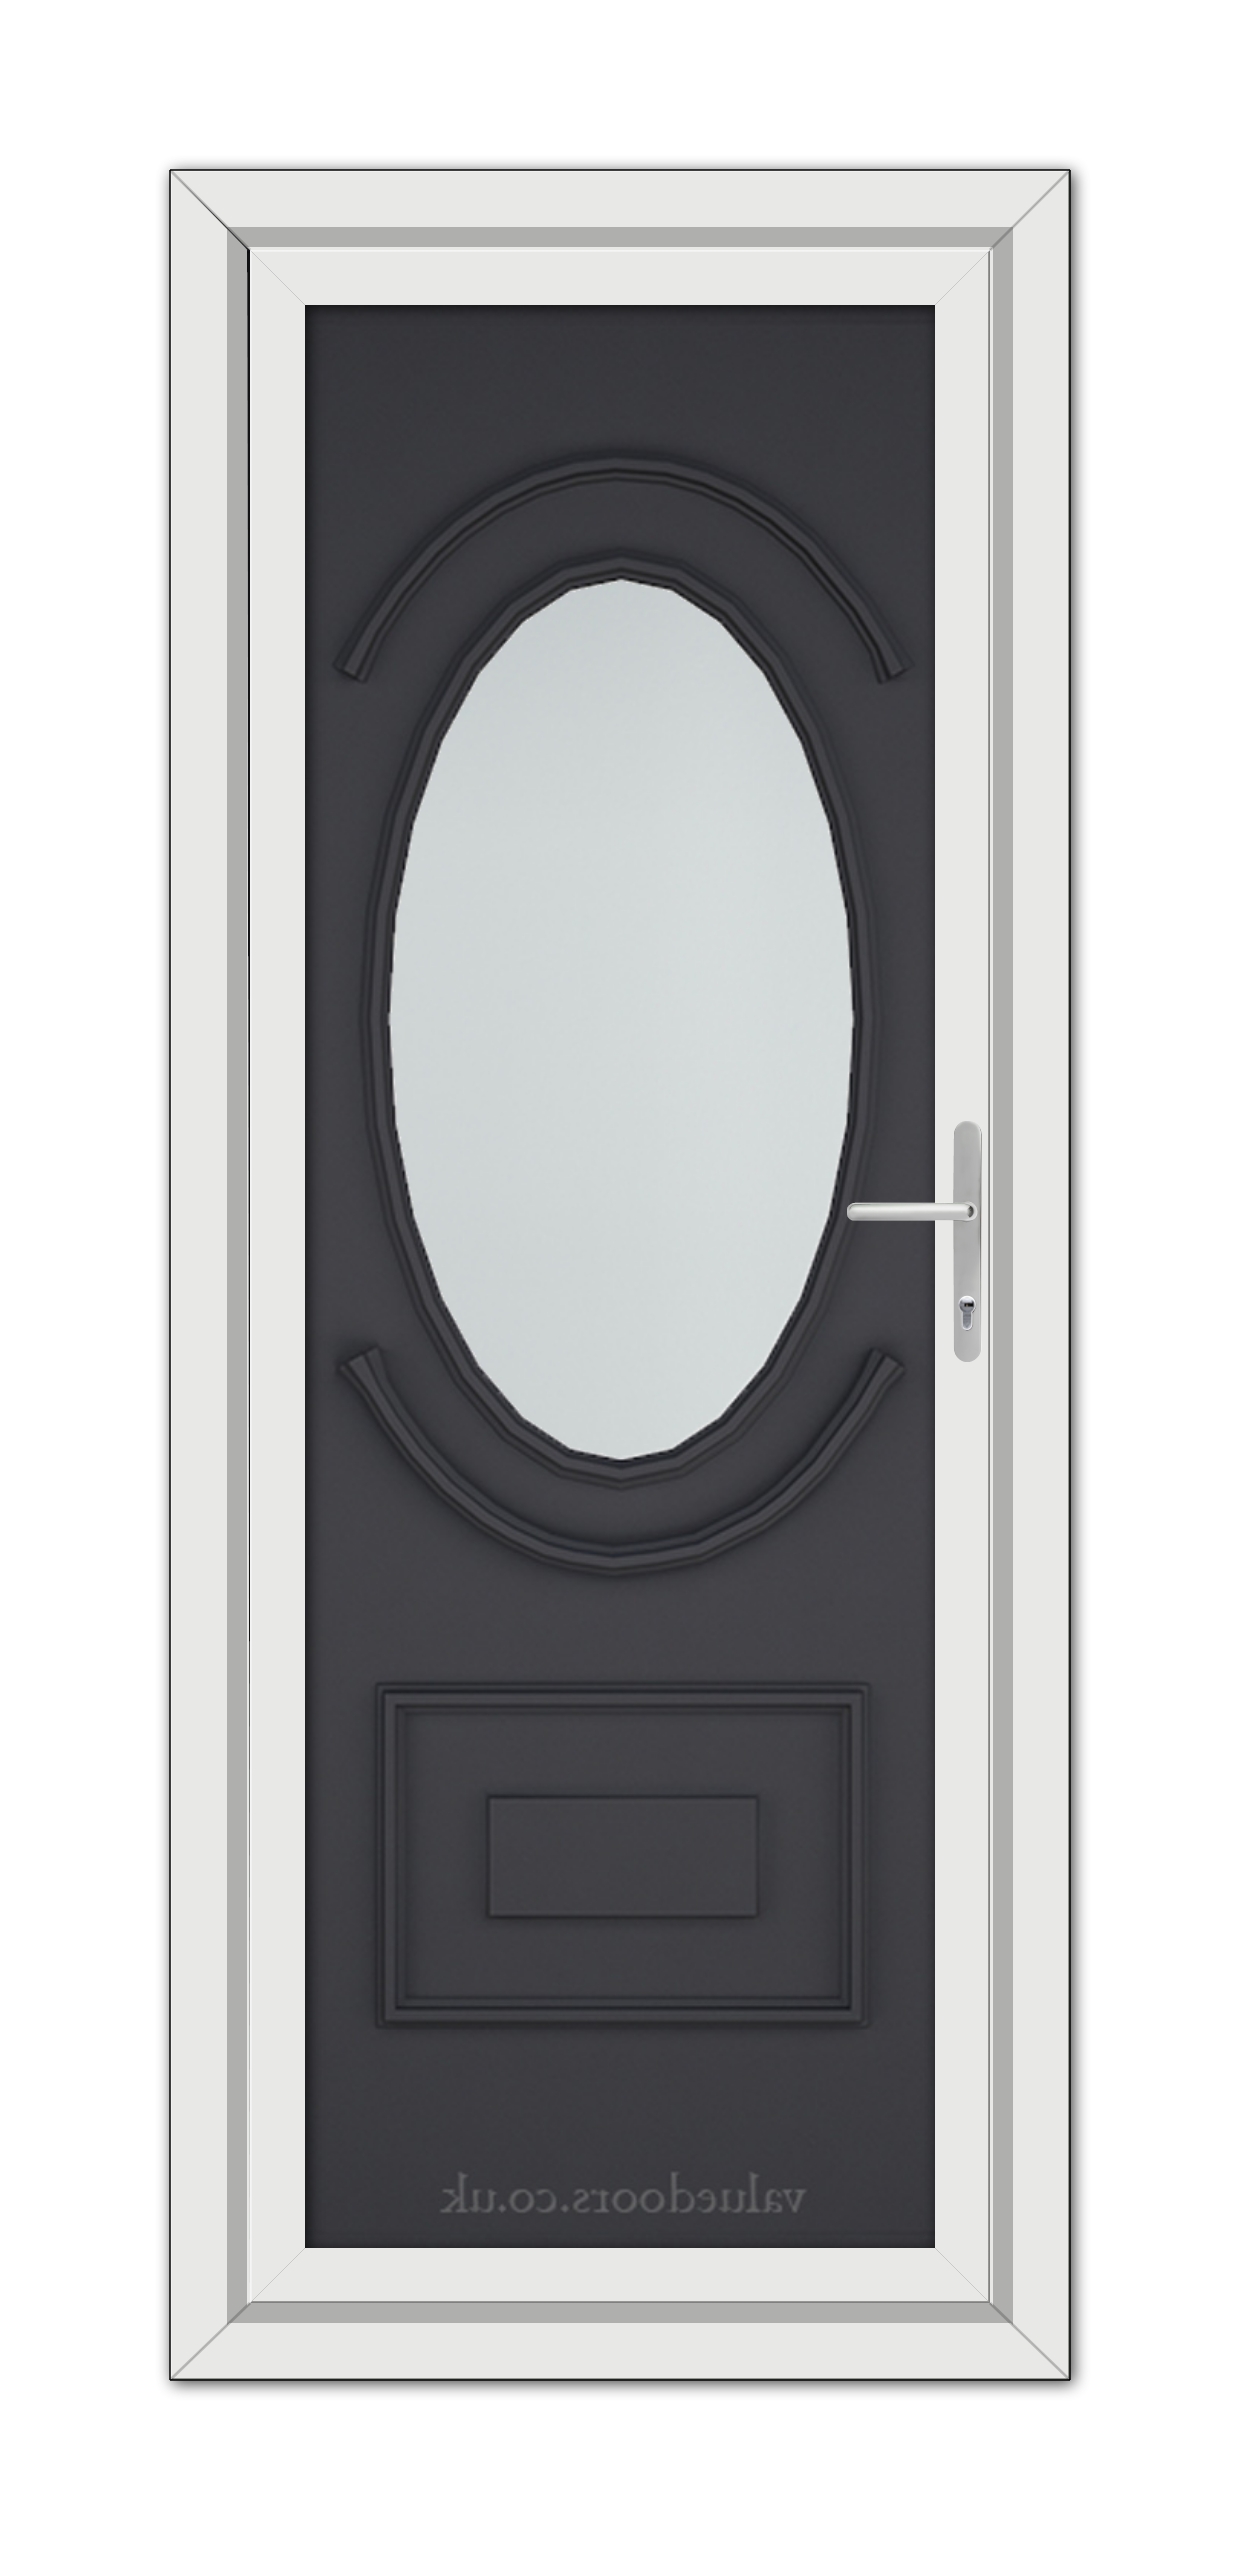 A Grey Richmond uPVC Door with an oval glass pane and a white frame, featuring a sleek handle on the right side.